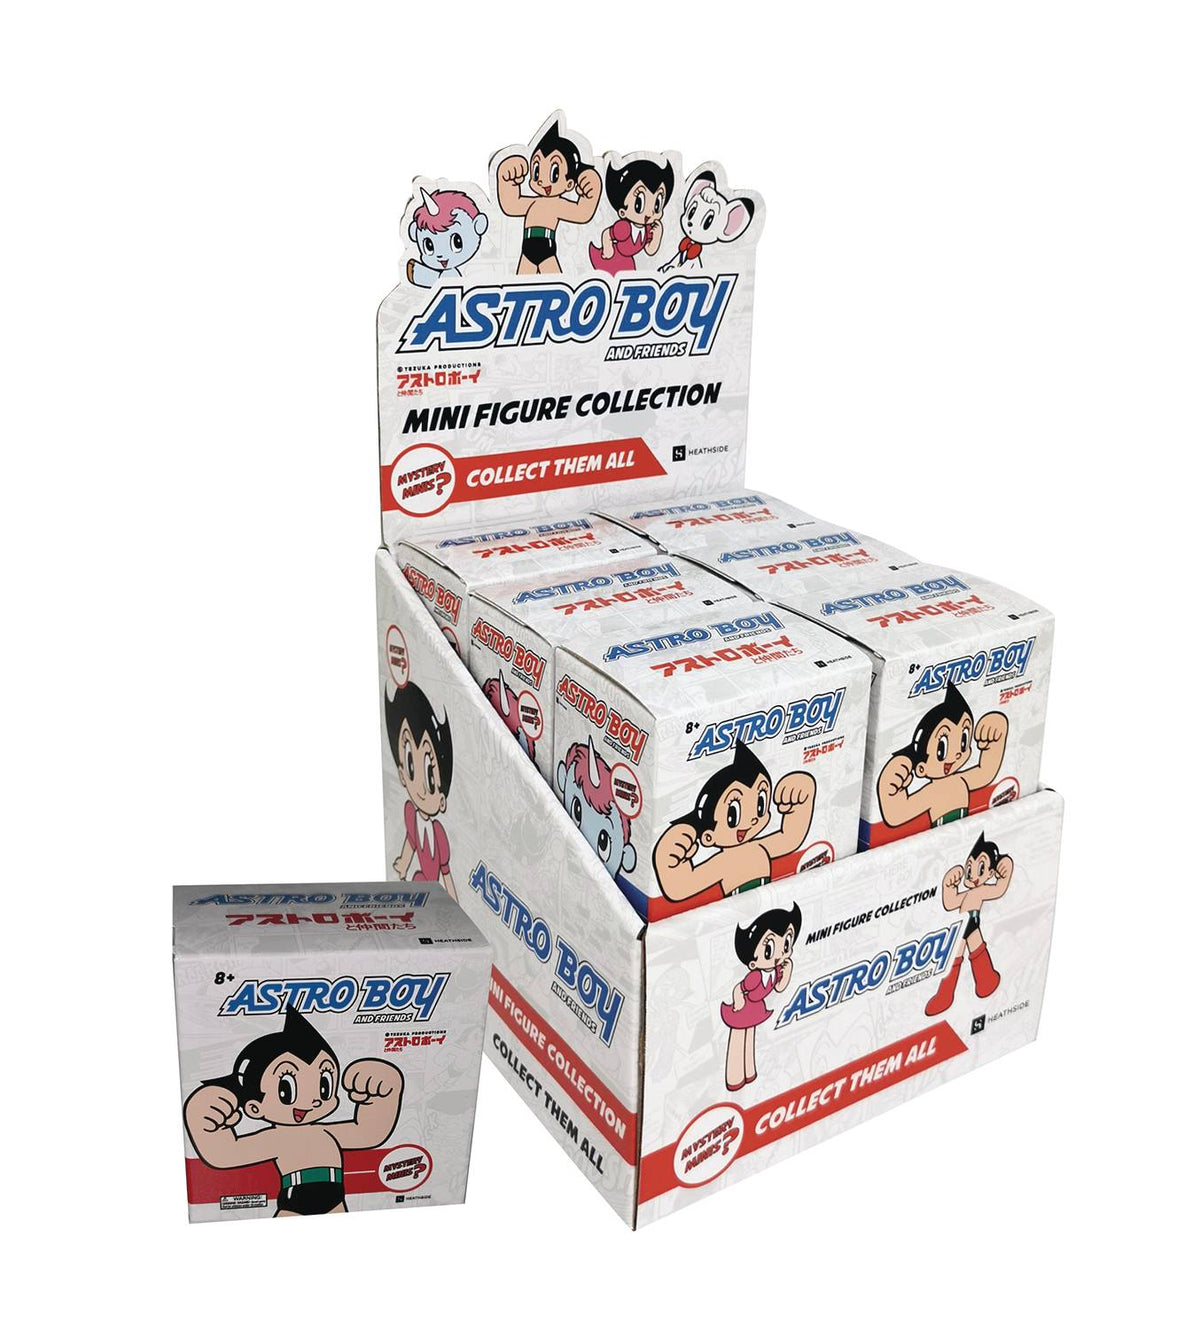 Astroboy PX Mini Figures Blind Box Series by Heathside Trading